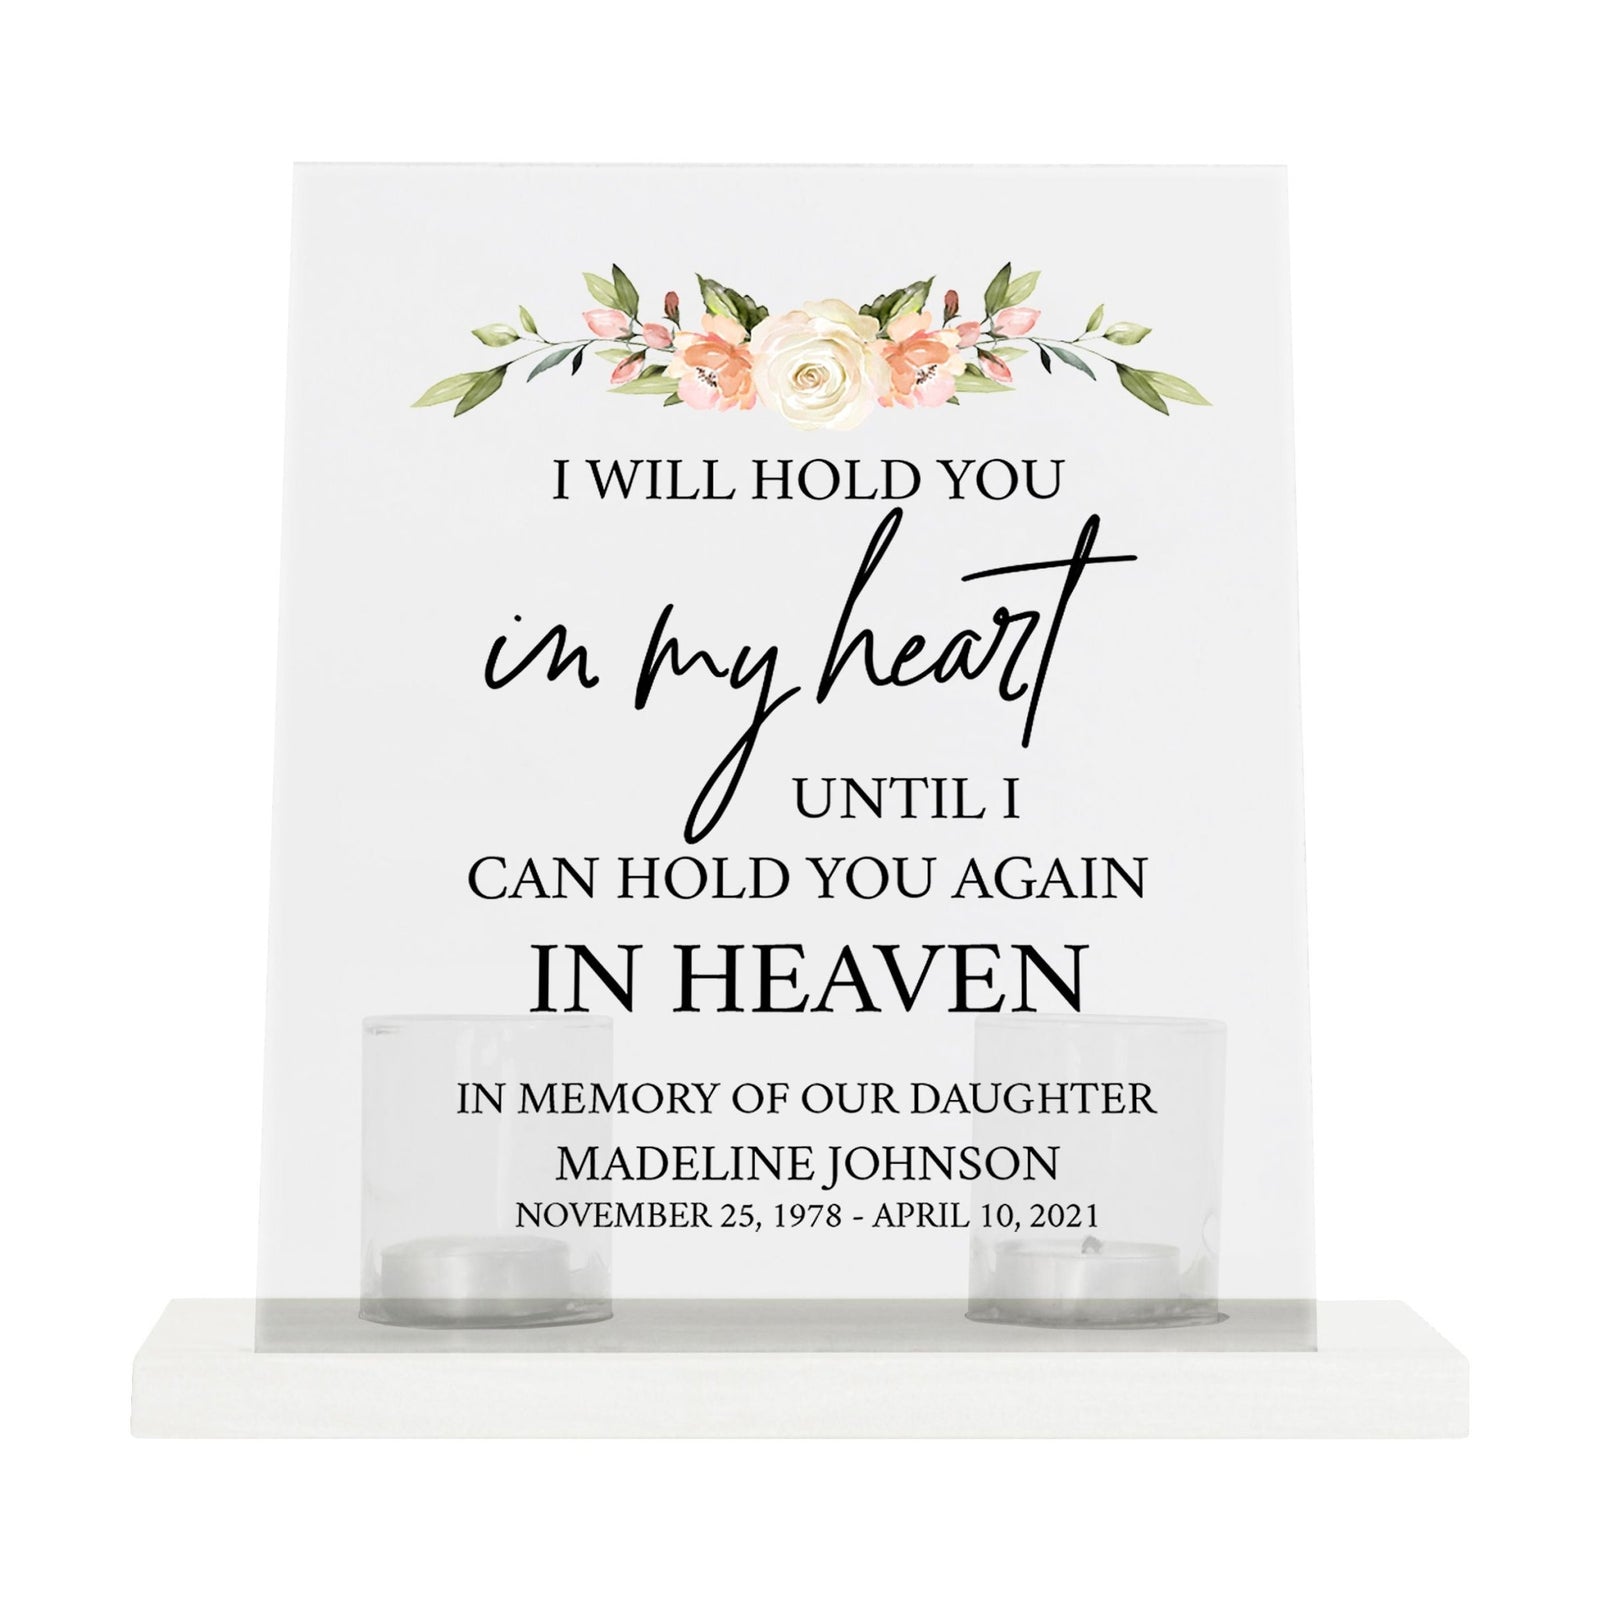 Personalized Memorial 6x6 inches Decorative Frosted Acrylic Wooden Sign with Tealight Holder (I Will Hold You) Home Decoration Plaque Loss of Loved One Bereavement Sympathy Keepsake - LifeSong Milestones